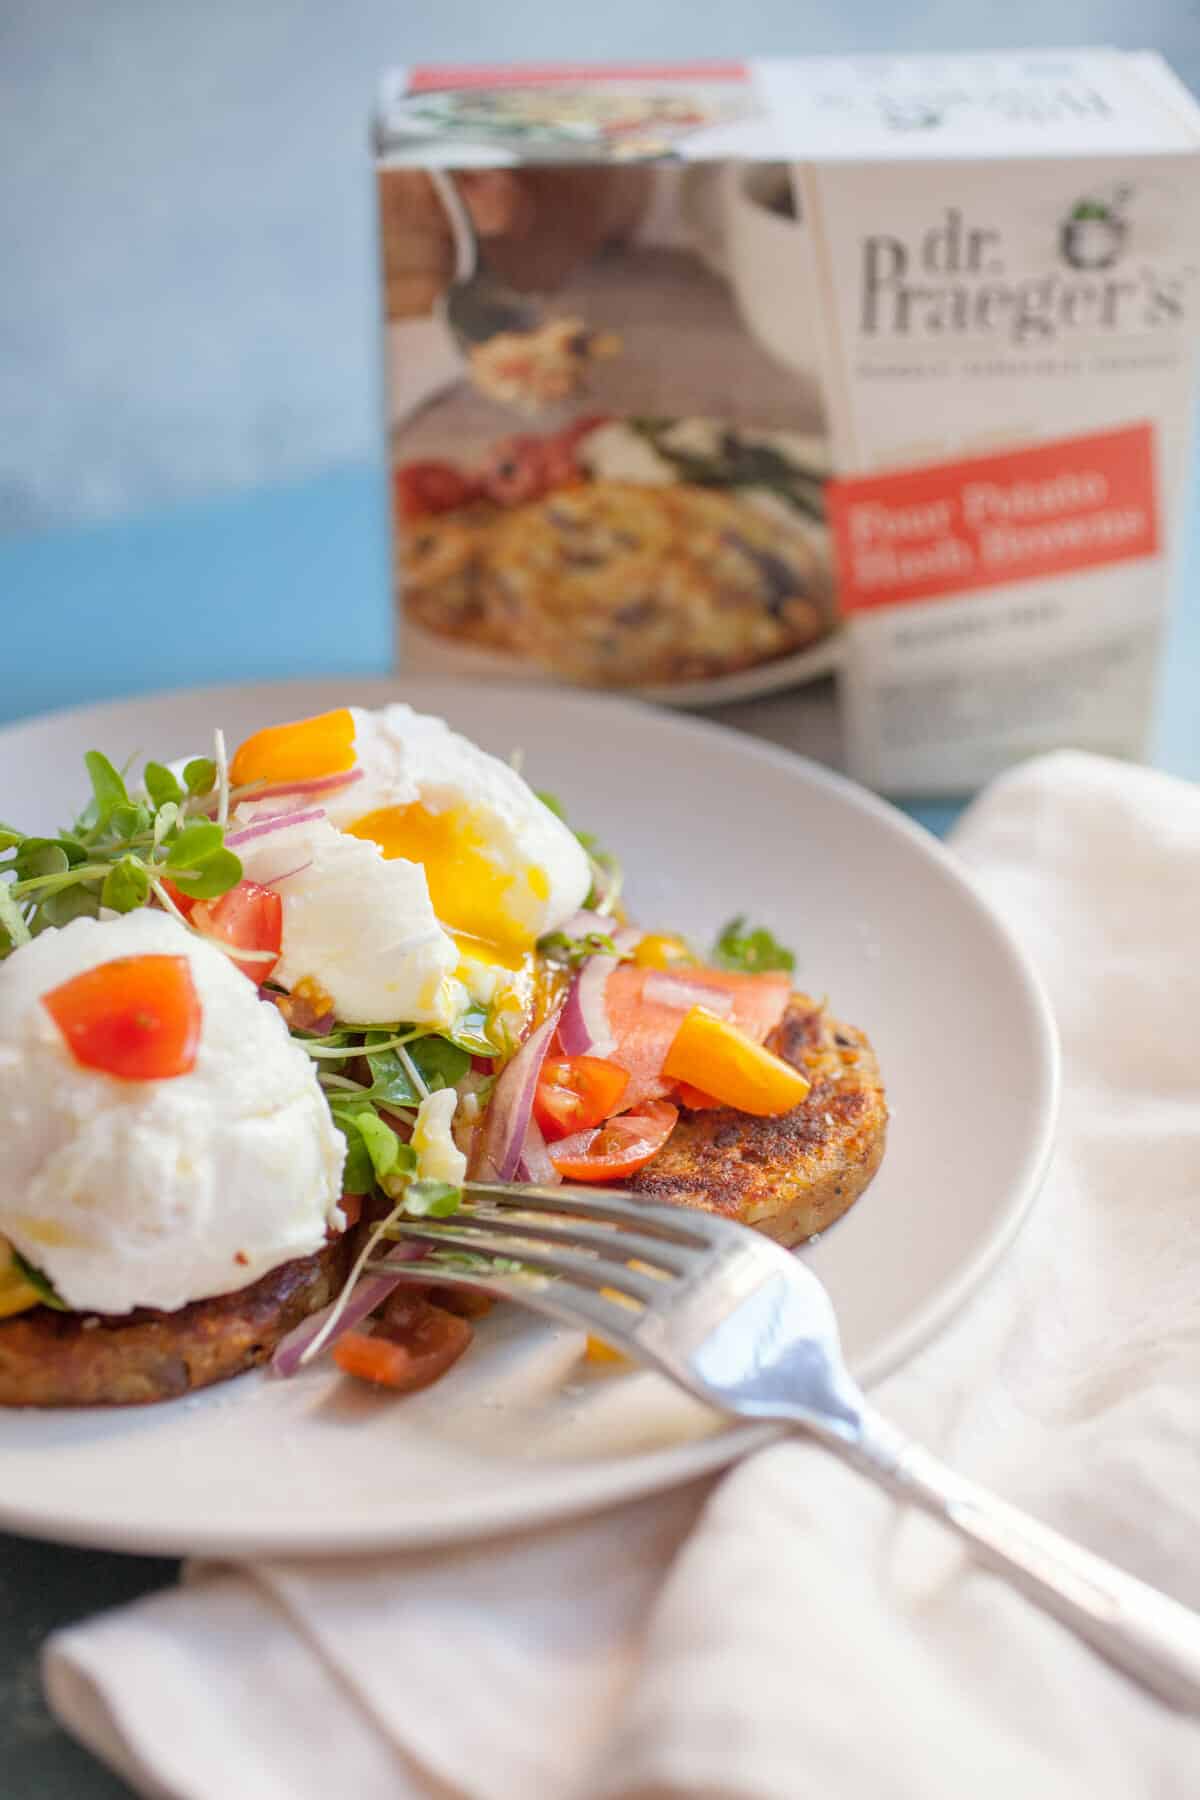 Smoked salmon potato stacks: These beautiful potato and egg stacks are SO easy to make and they look and taste very elegant. They are your new favorite brunch/fancy meal! | macheesmo.com